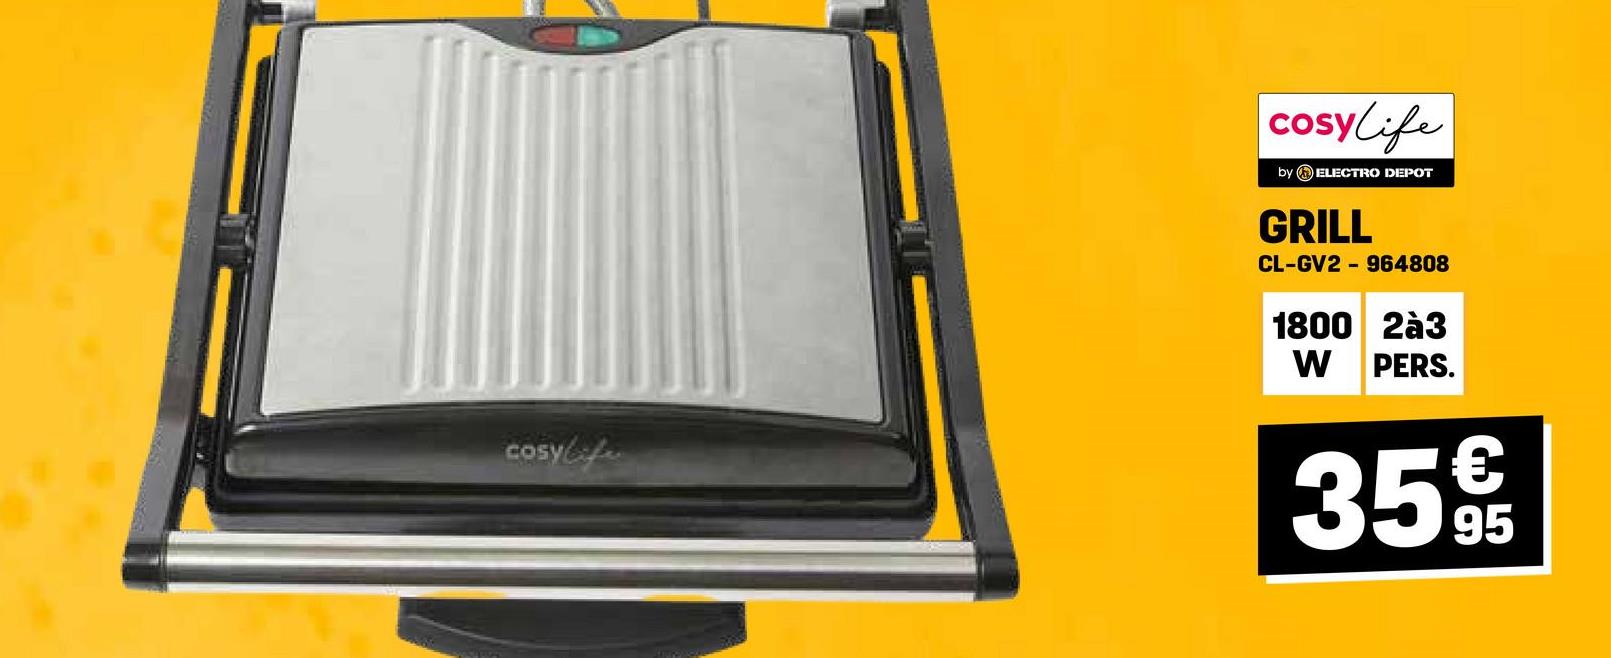 cosylife
cosylife
by ELECTRO DEPOT
GRILL
CL-GV2 964808
1800 2à3
W PERS.
€
35 95